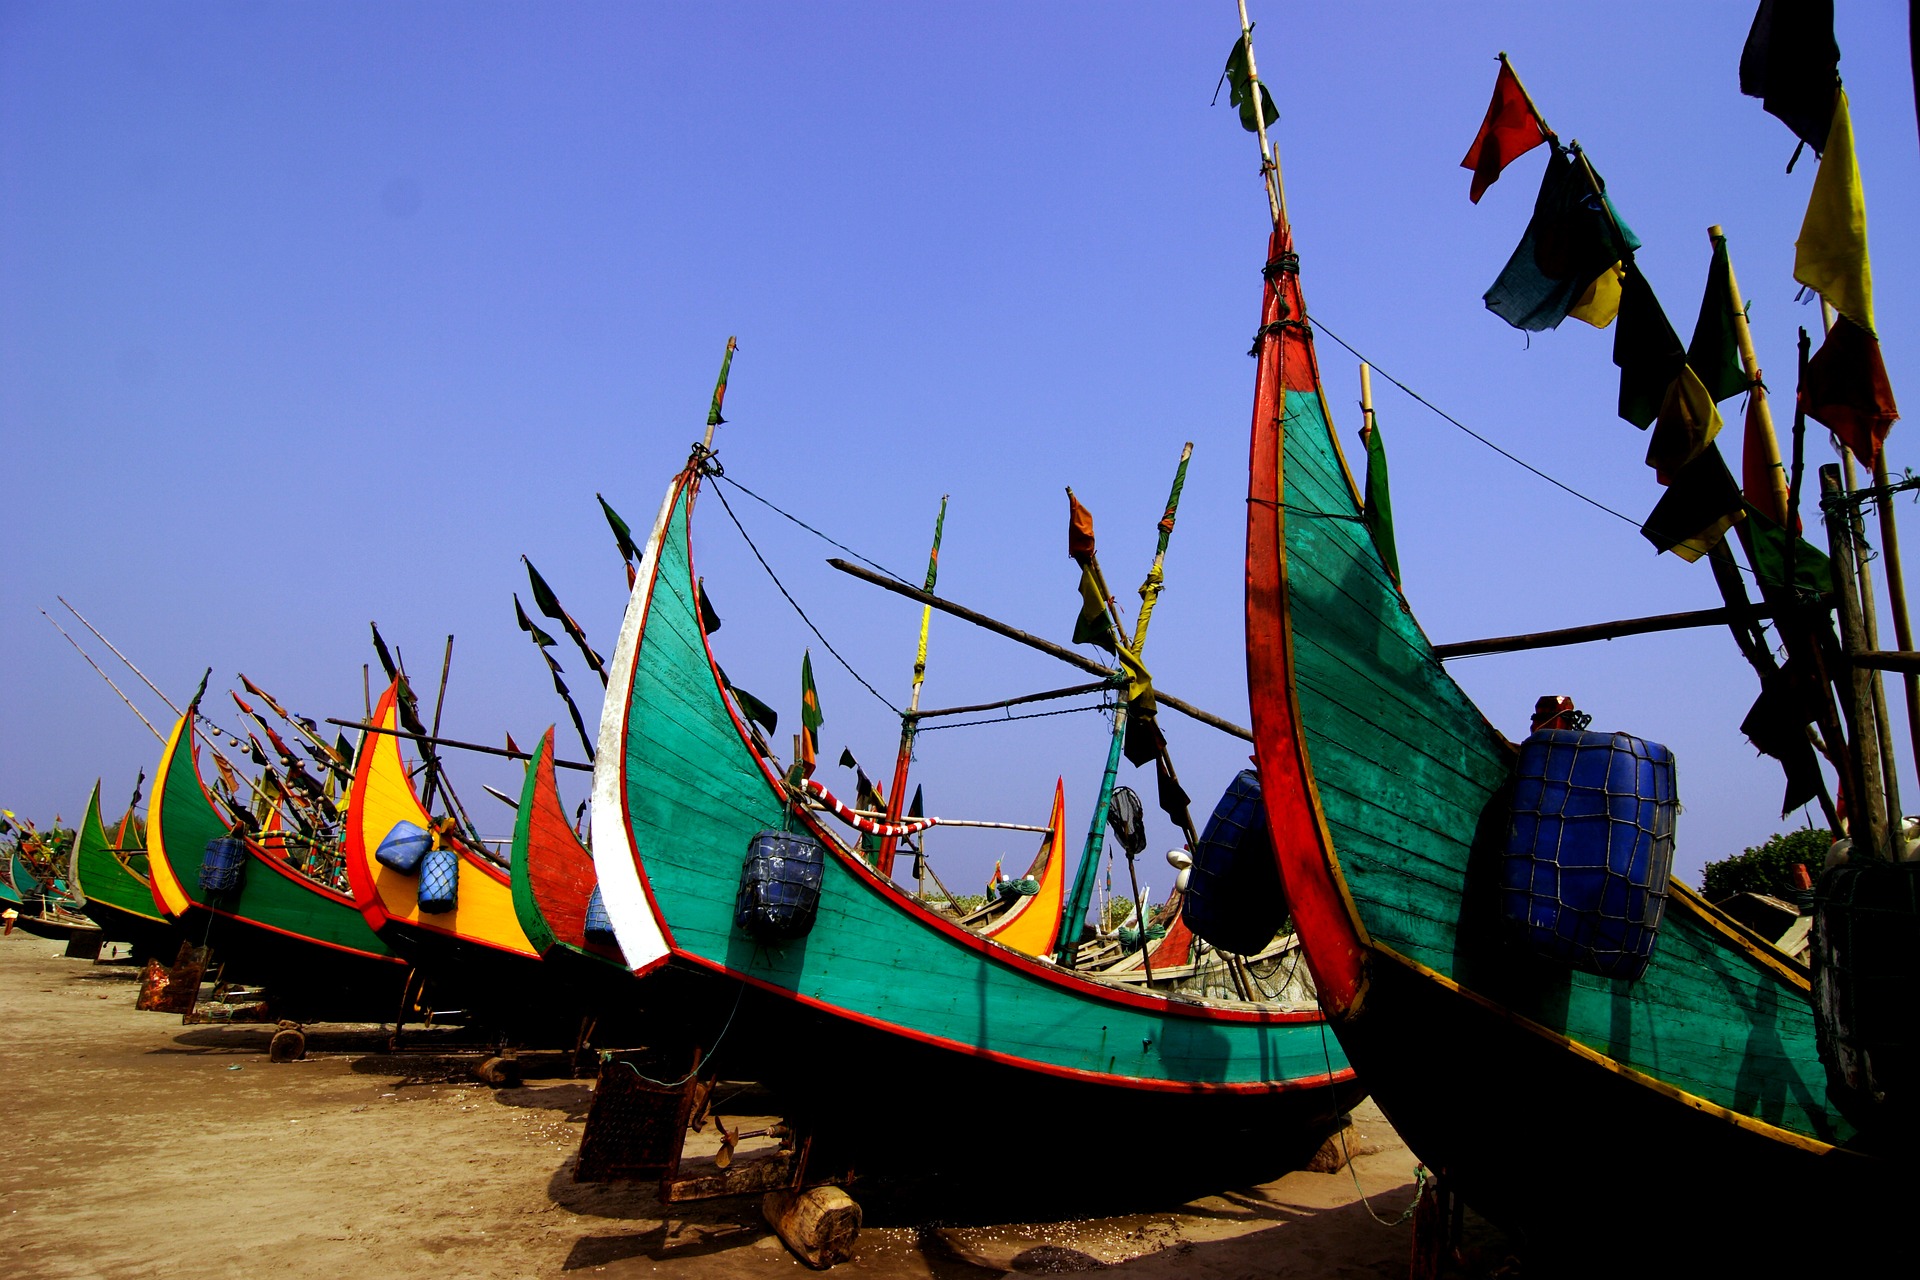 Colorful boats pulled onto the beach